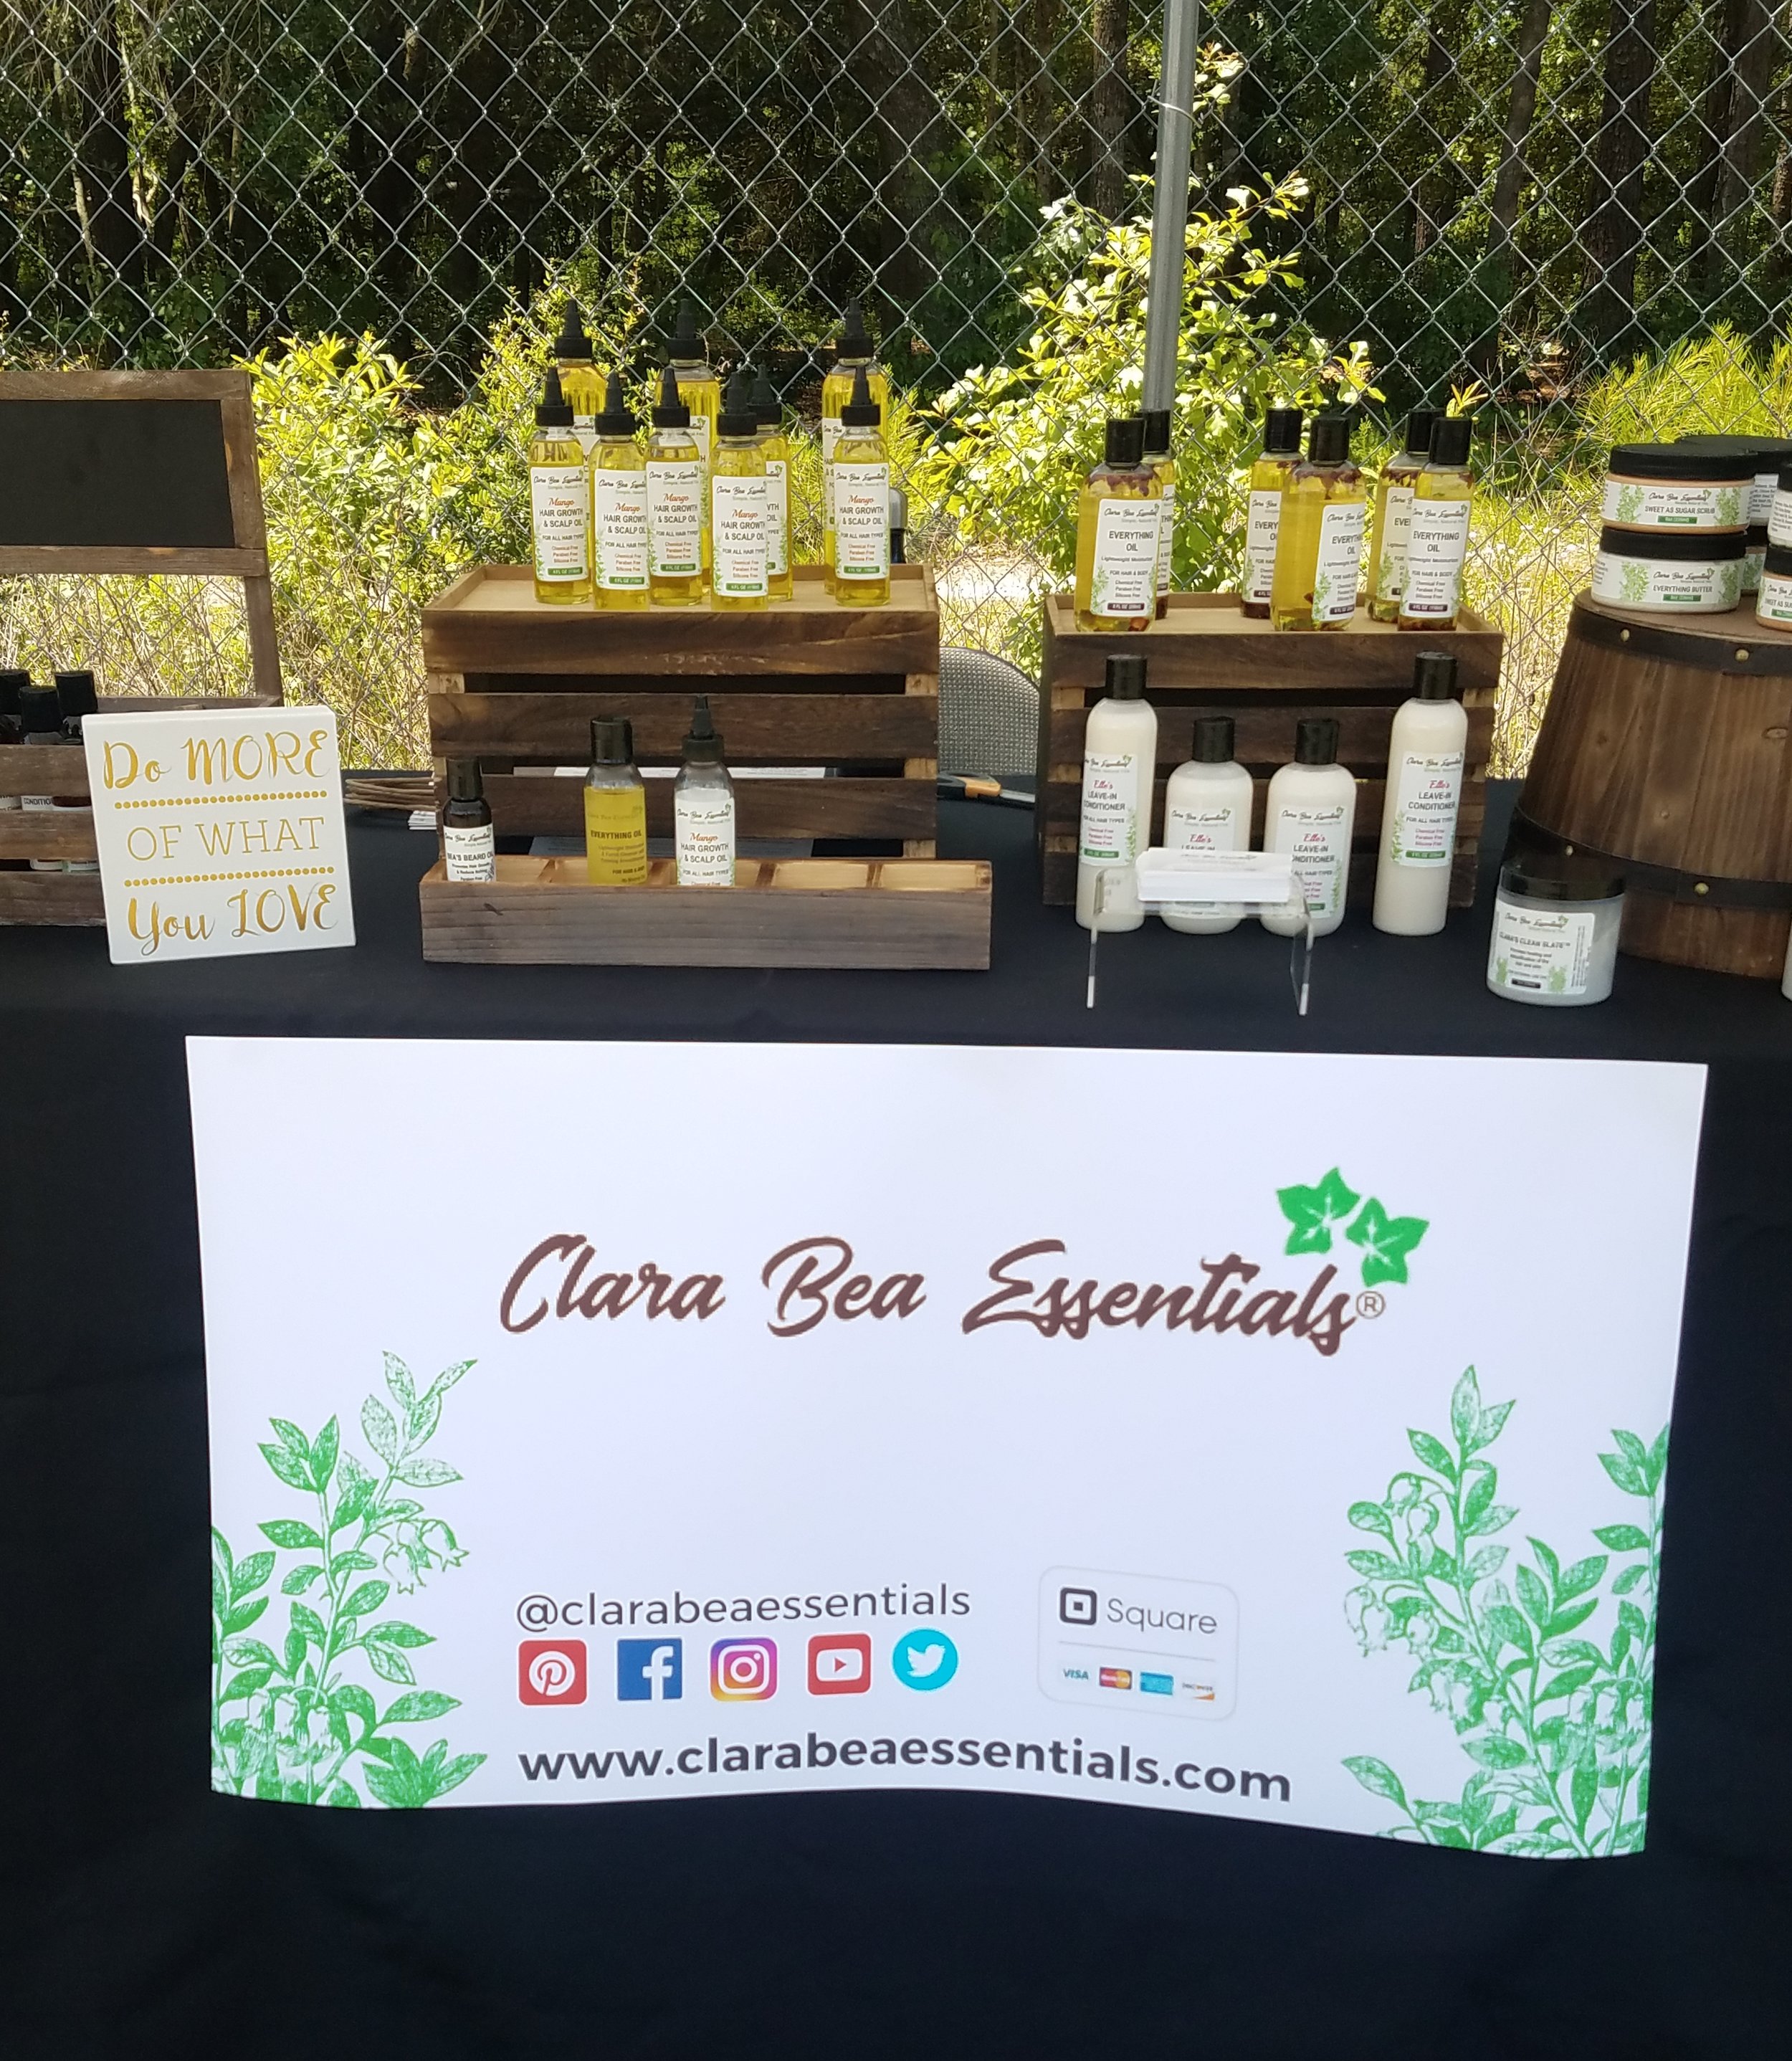 Clara Bea Essentials booth with health and beauty items for sale